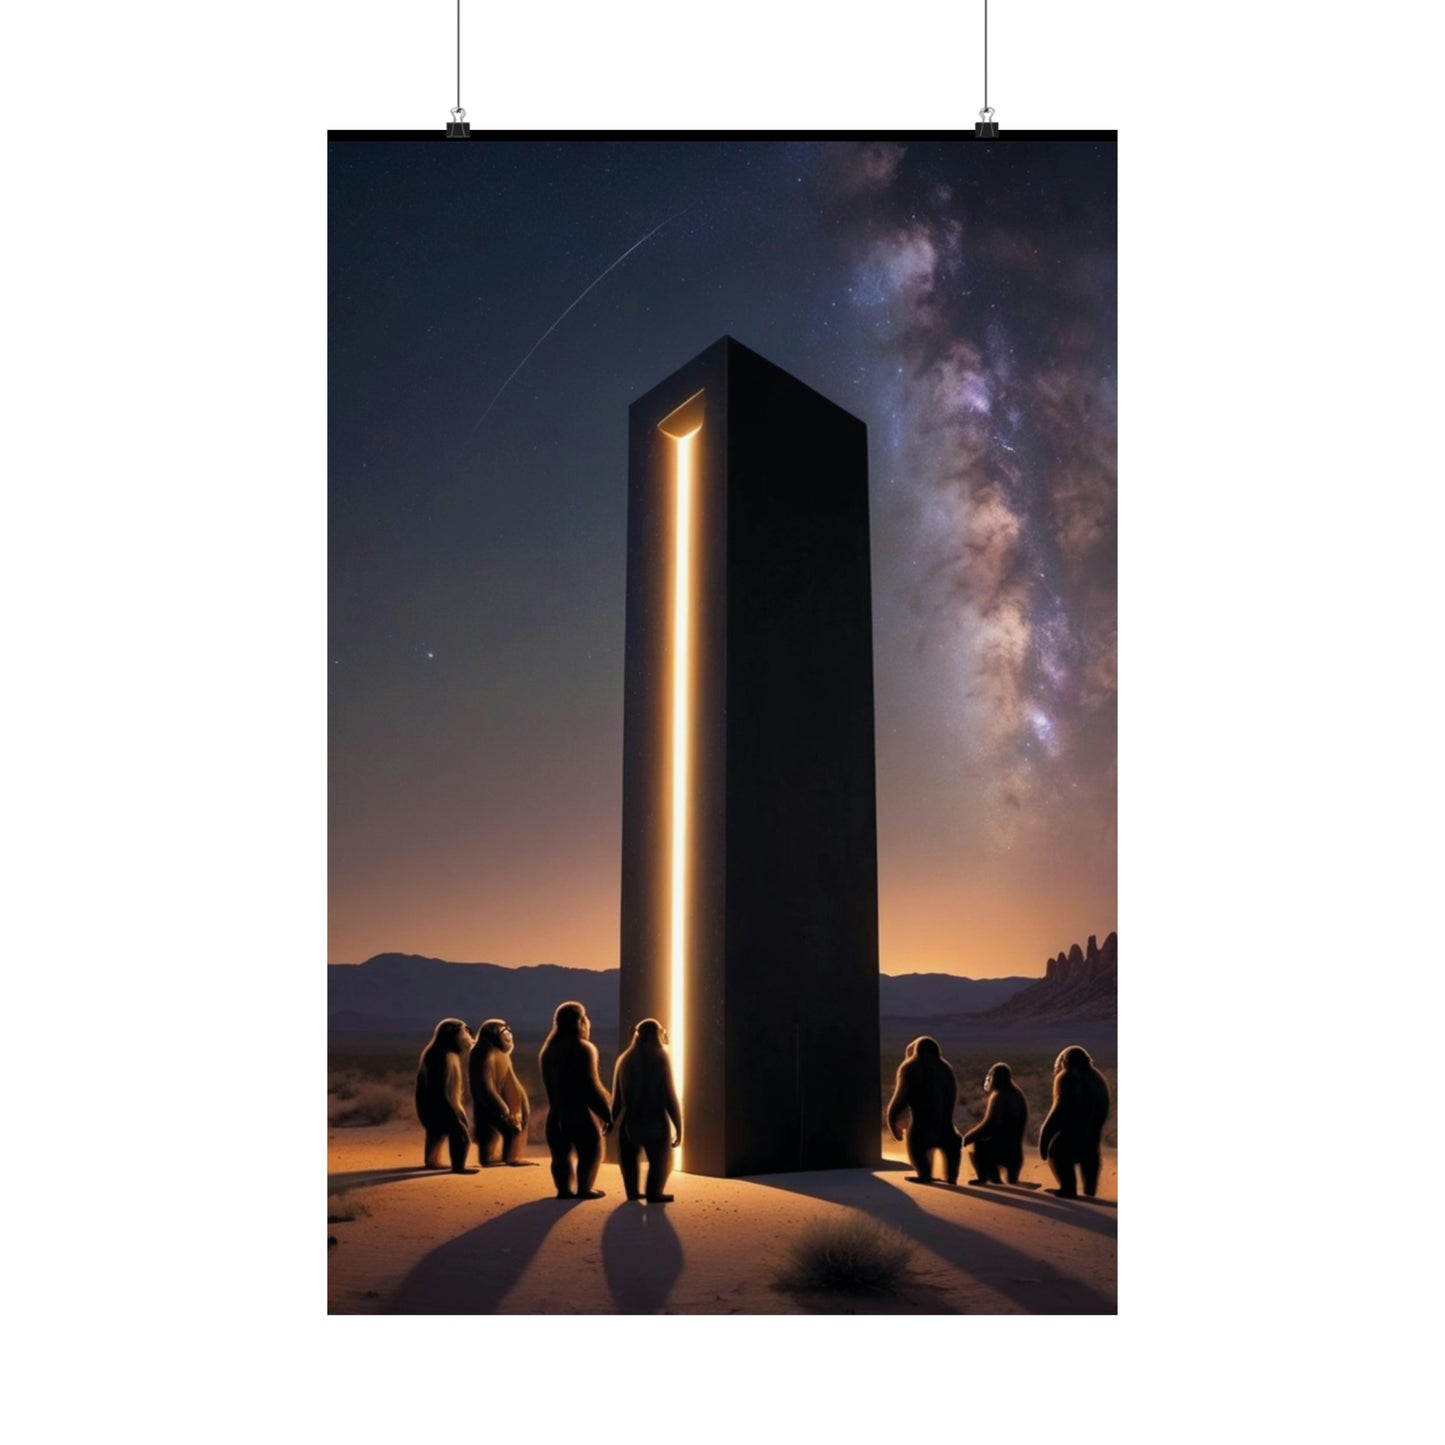 Transform your space with our stunning Monolith poster, a homage to the cinematic masterpiece '2001: A Space Odyssey.' Immerse yourself in the cosmic glow of the neon monolith, surrounded by primal ape silhouettes against a surreal desert landscape. 